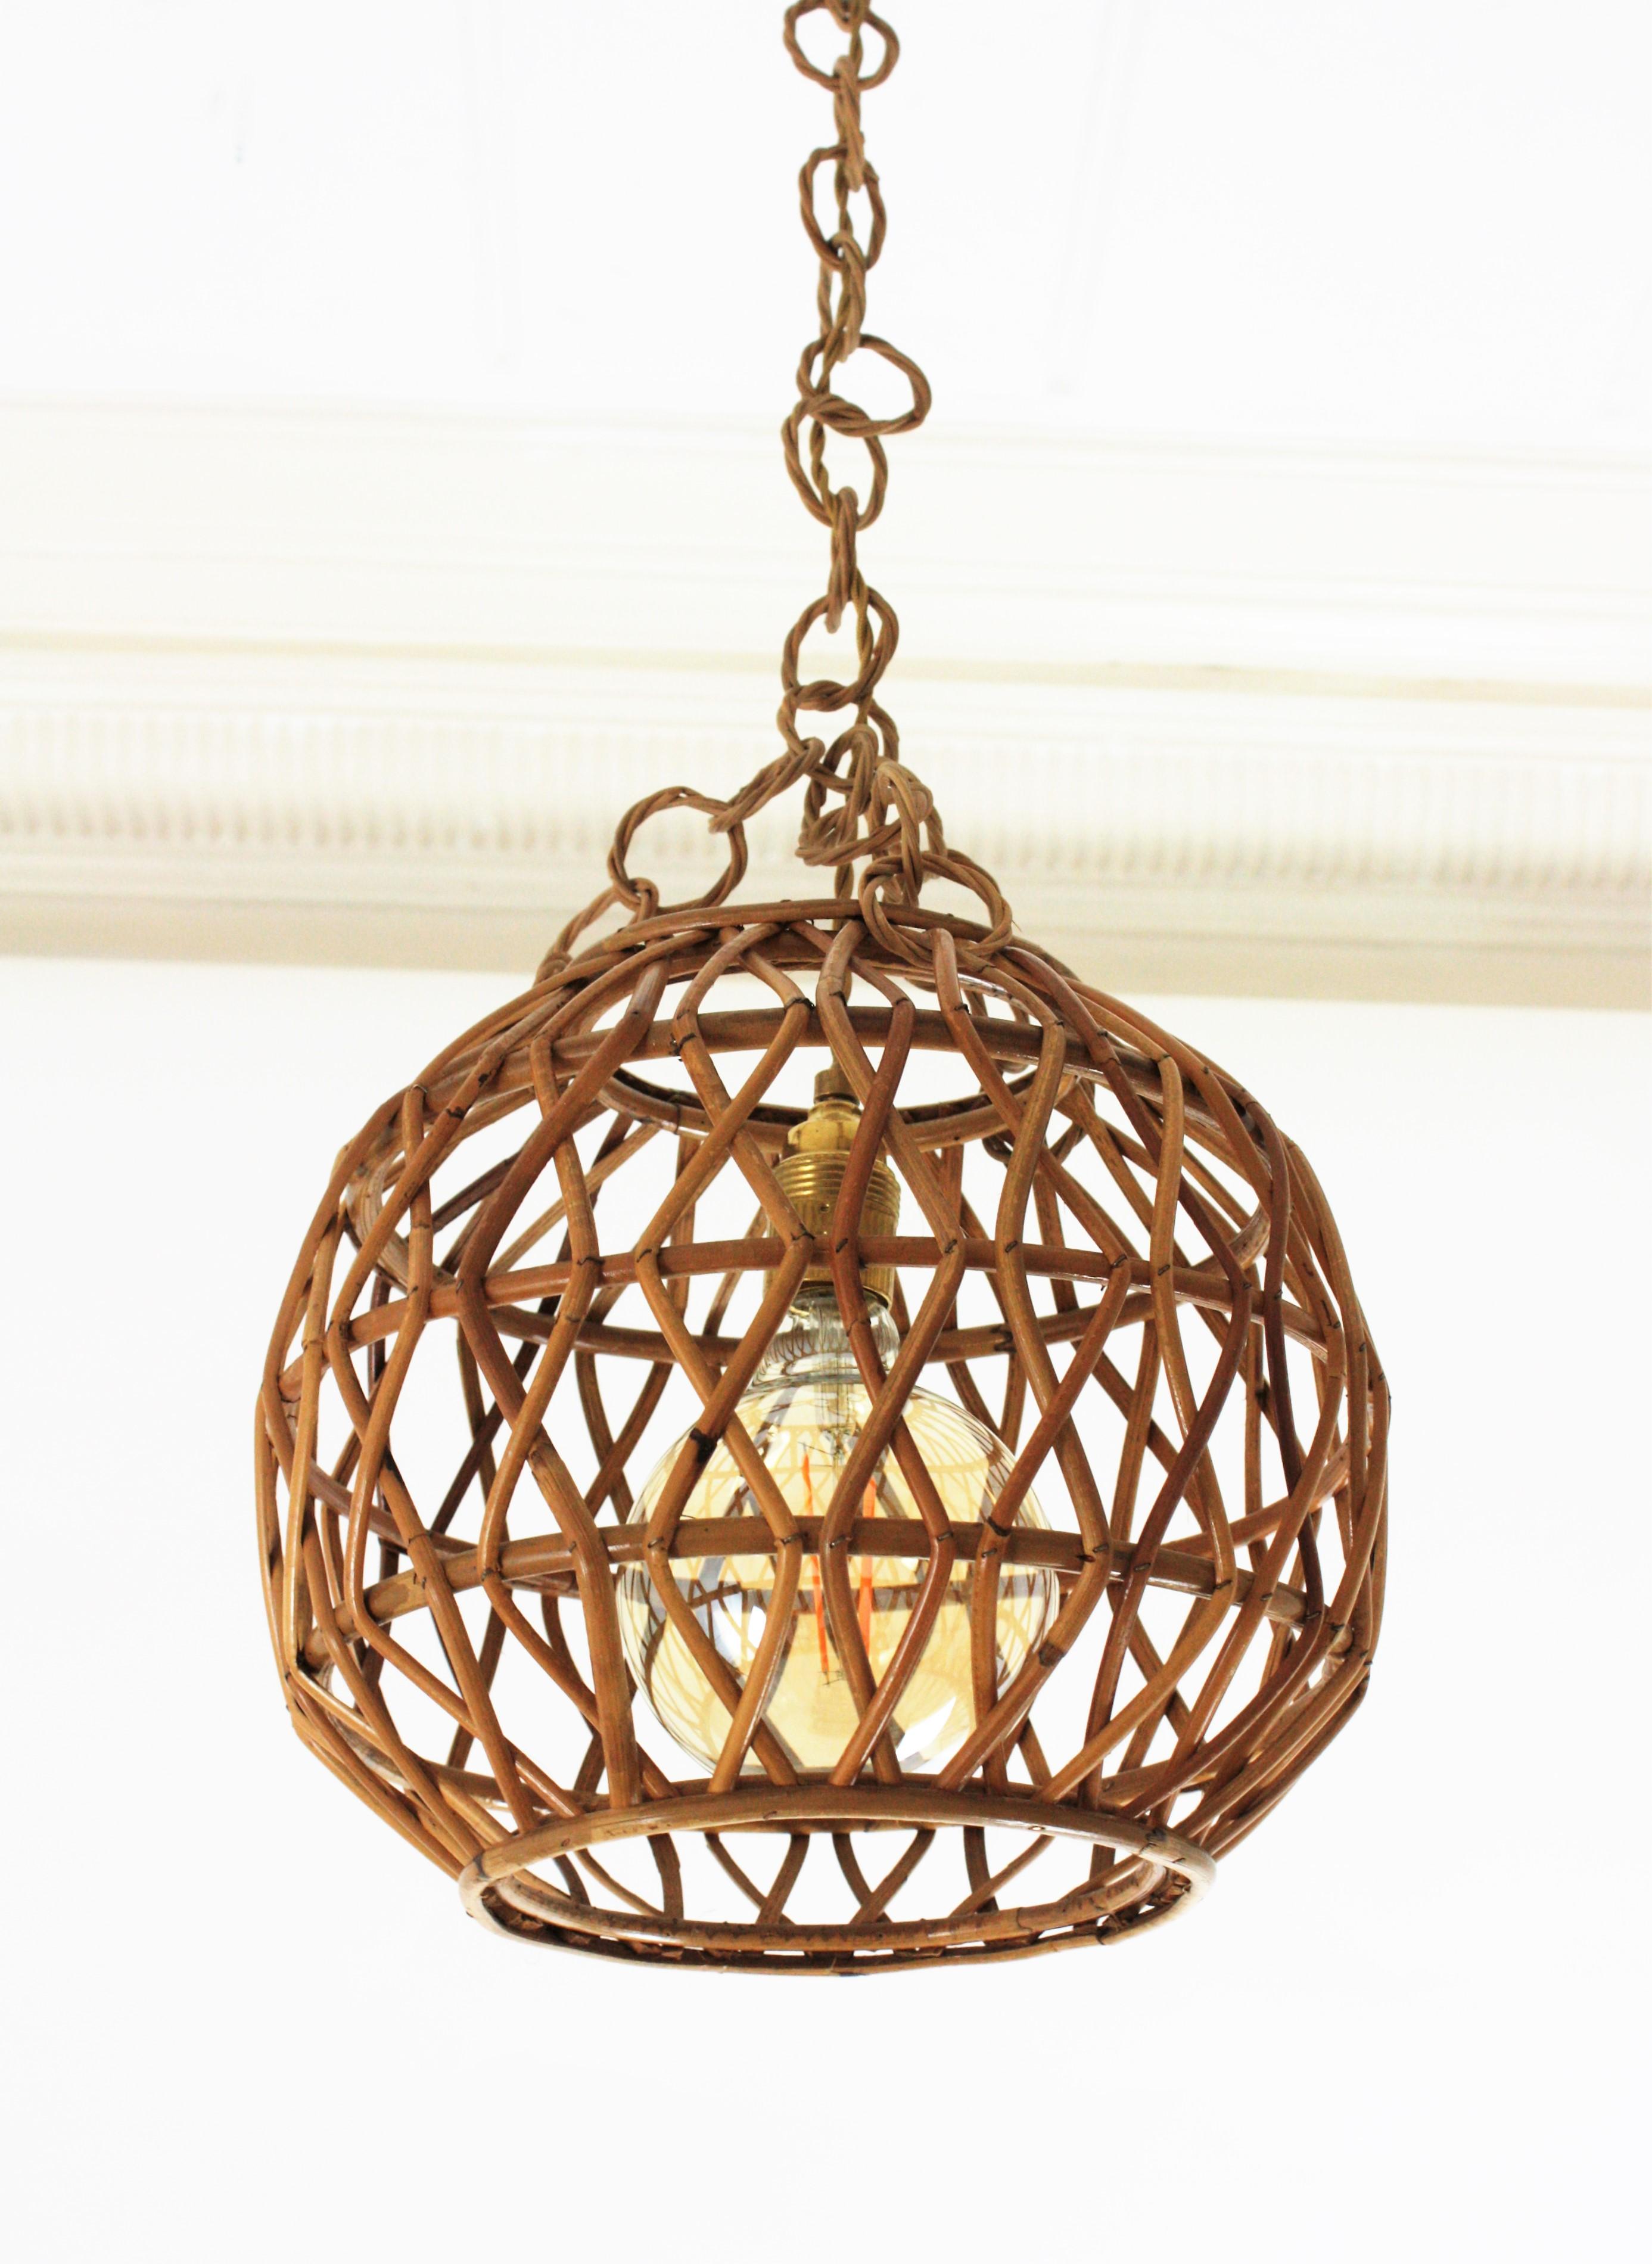 Hand-Crafted Rattan Globe Pendant Light, Spain, 1960s For Sale